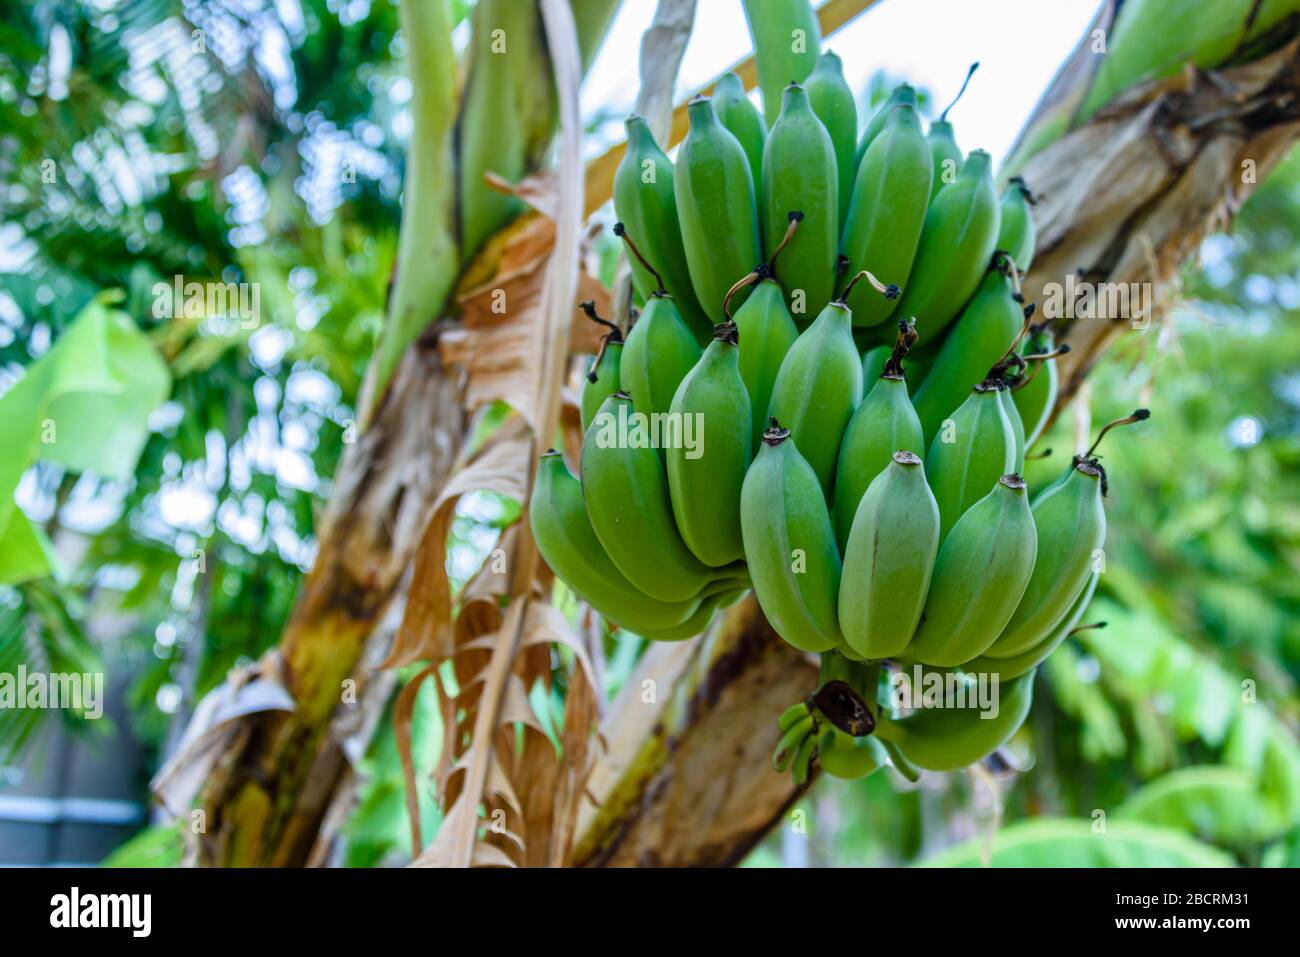 Bunch of unripe not ripe green bananas growing on a banana tree, Thailand Stock Photo